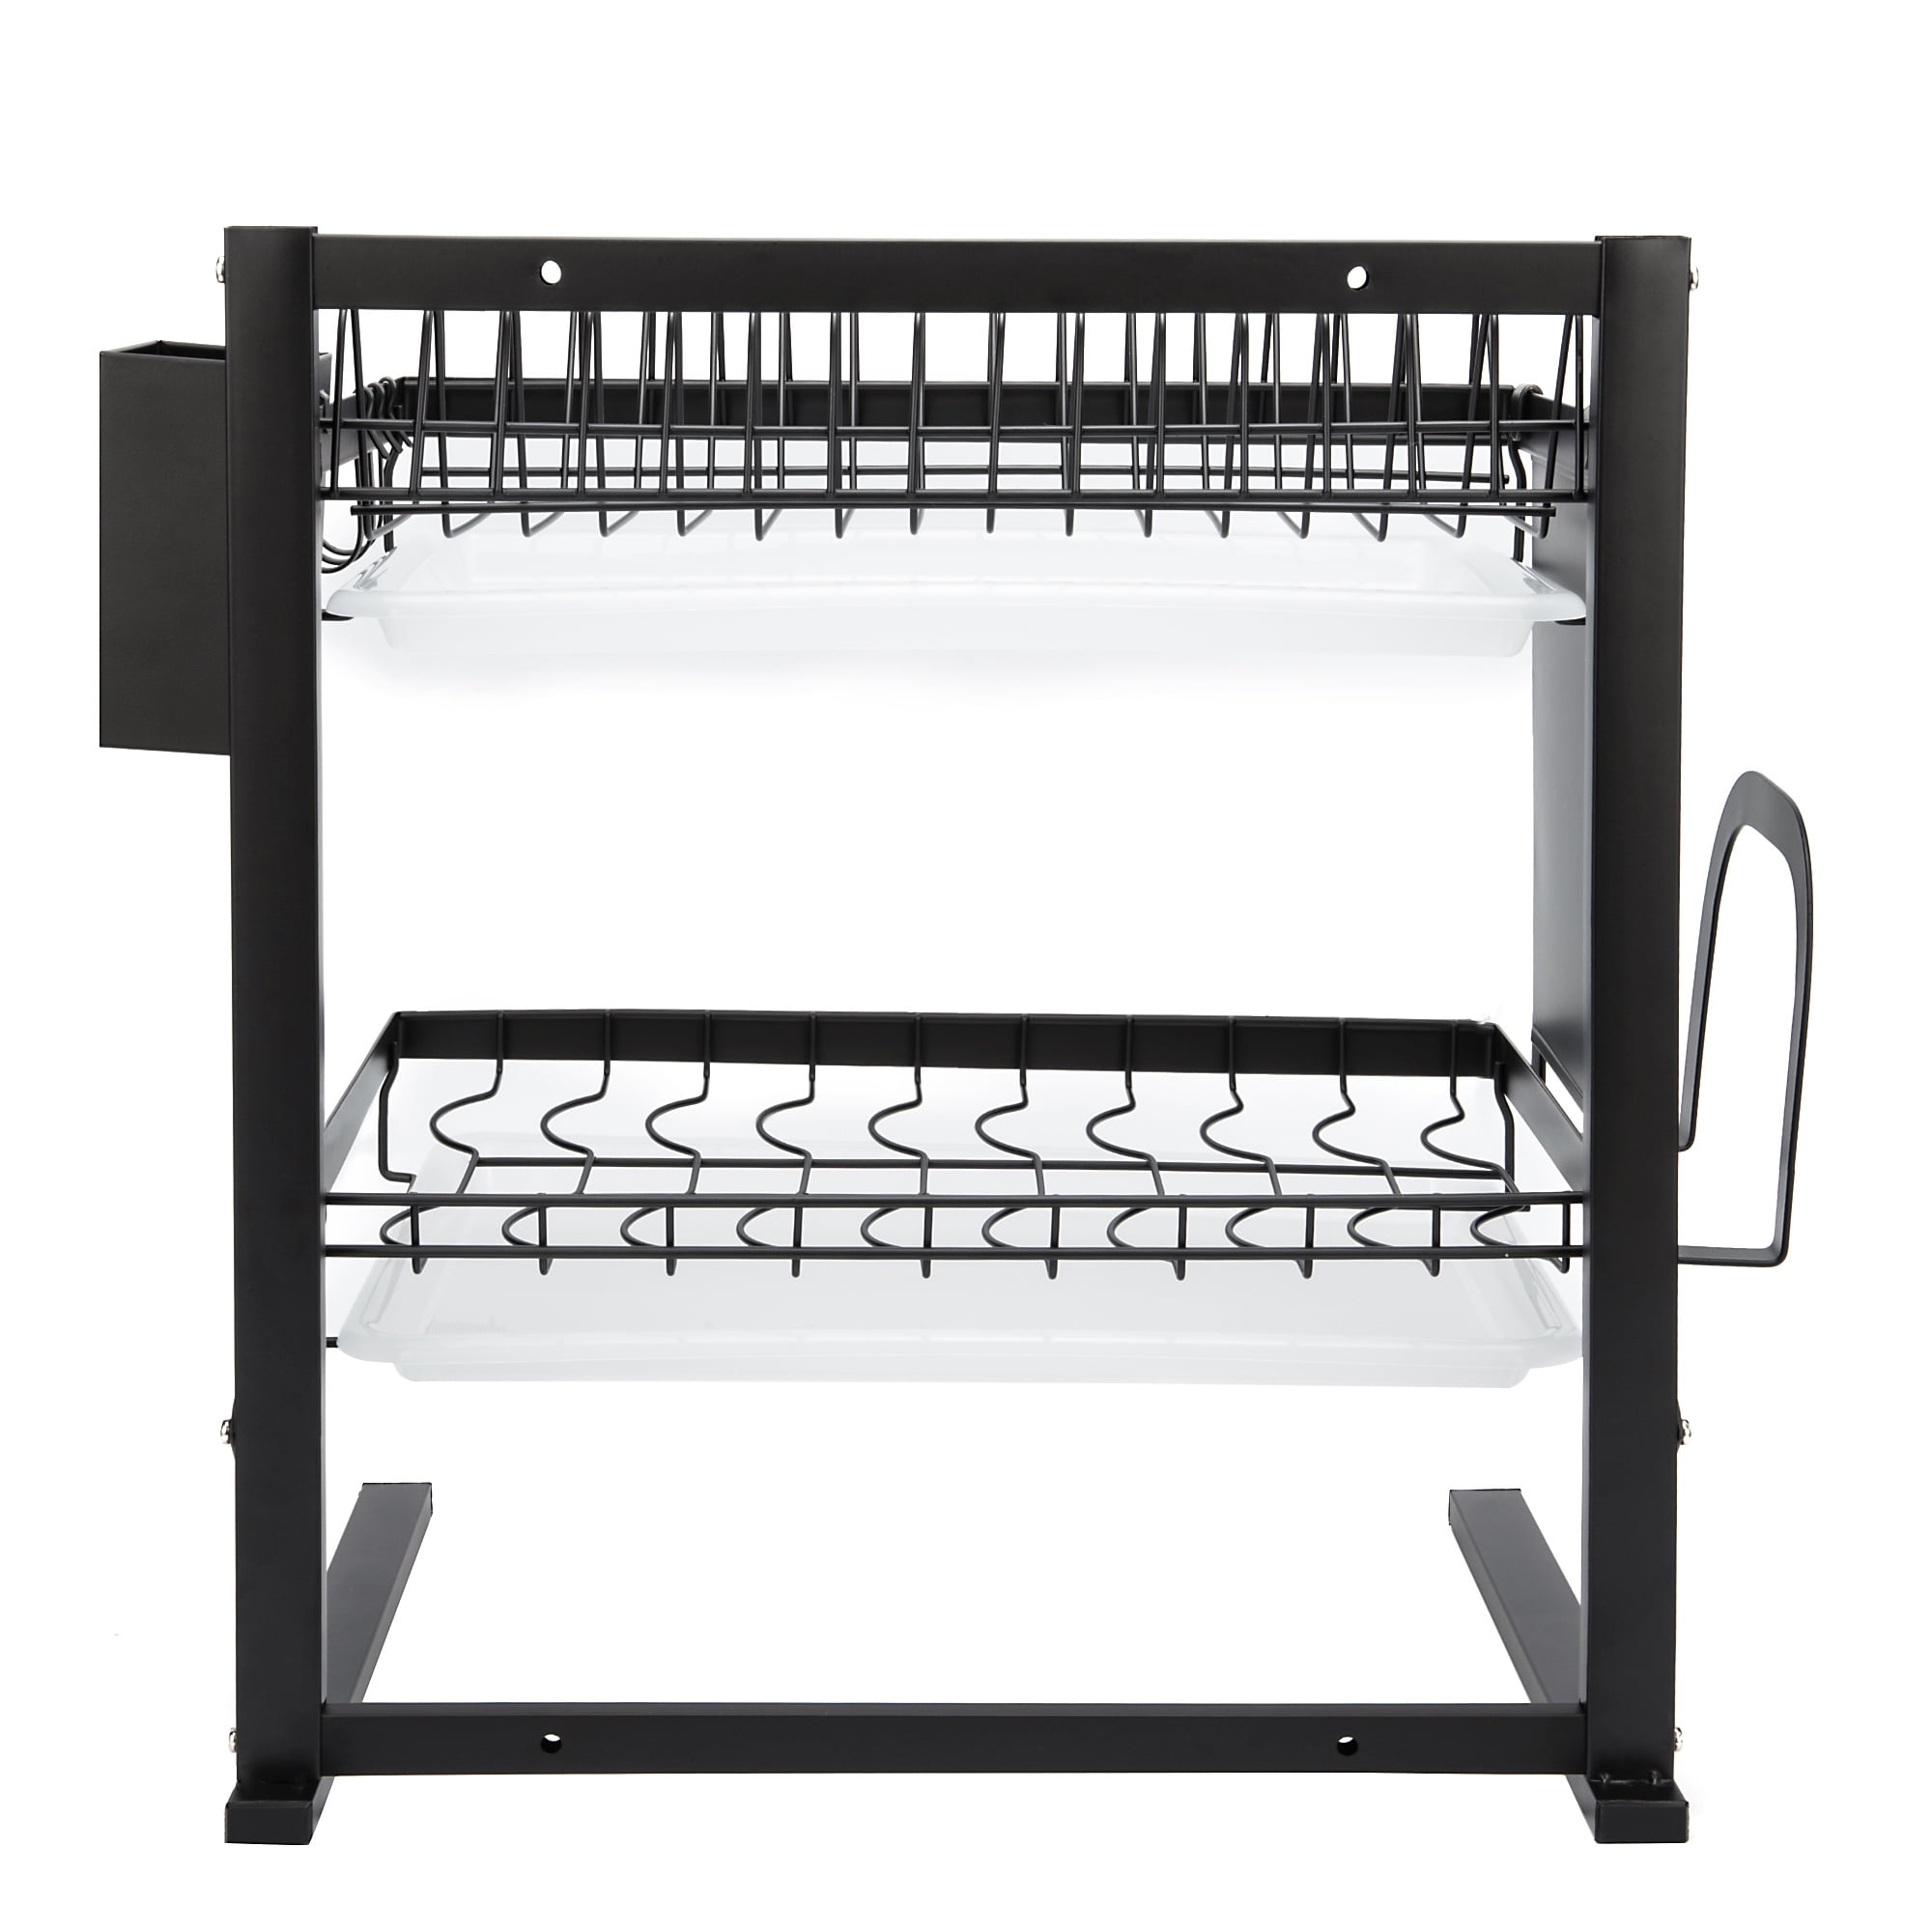 HappyHapi Drying Rack with Drainboard Utensil Holder - Durable Dish Rack  for Kitchen Counter Organization of Dishes, Knives, Spoons and Forks (Black)